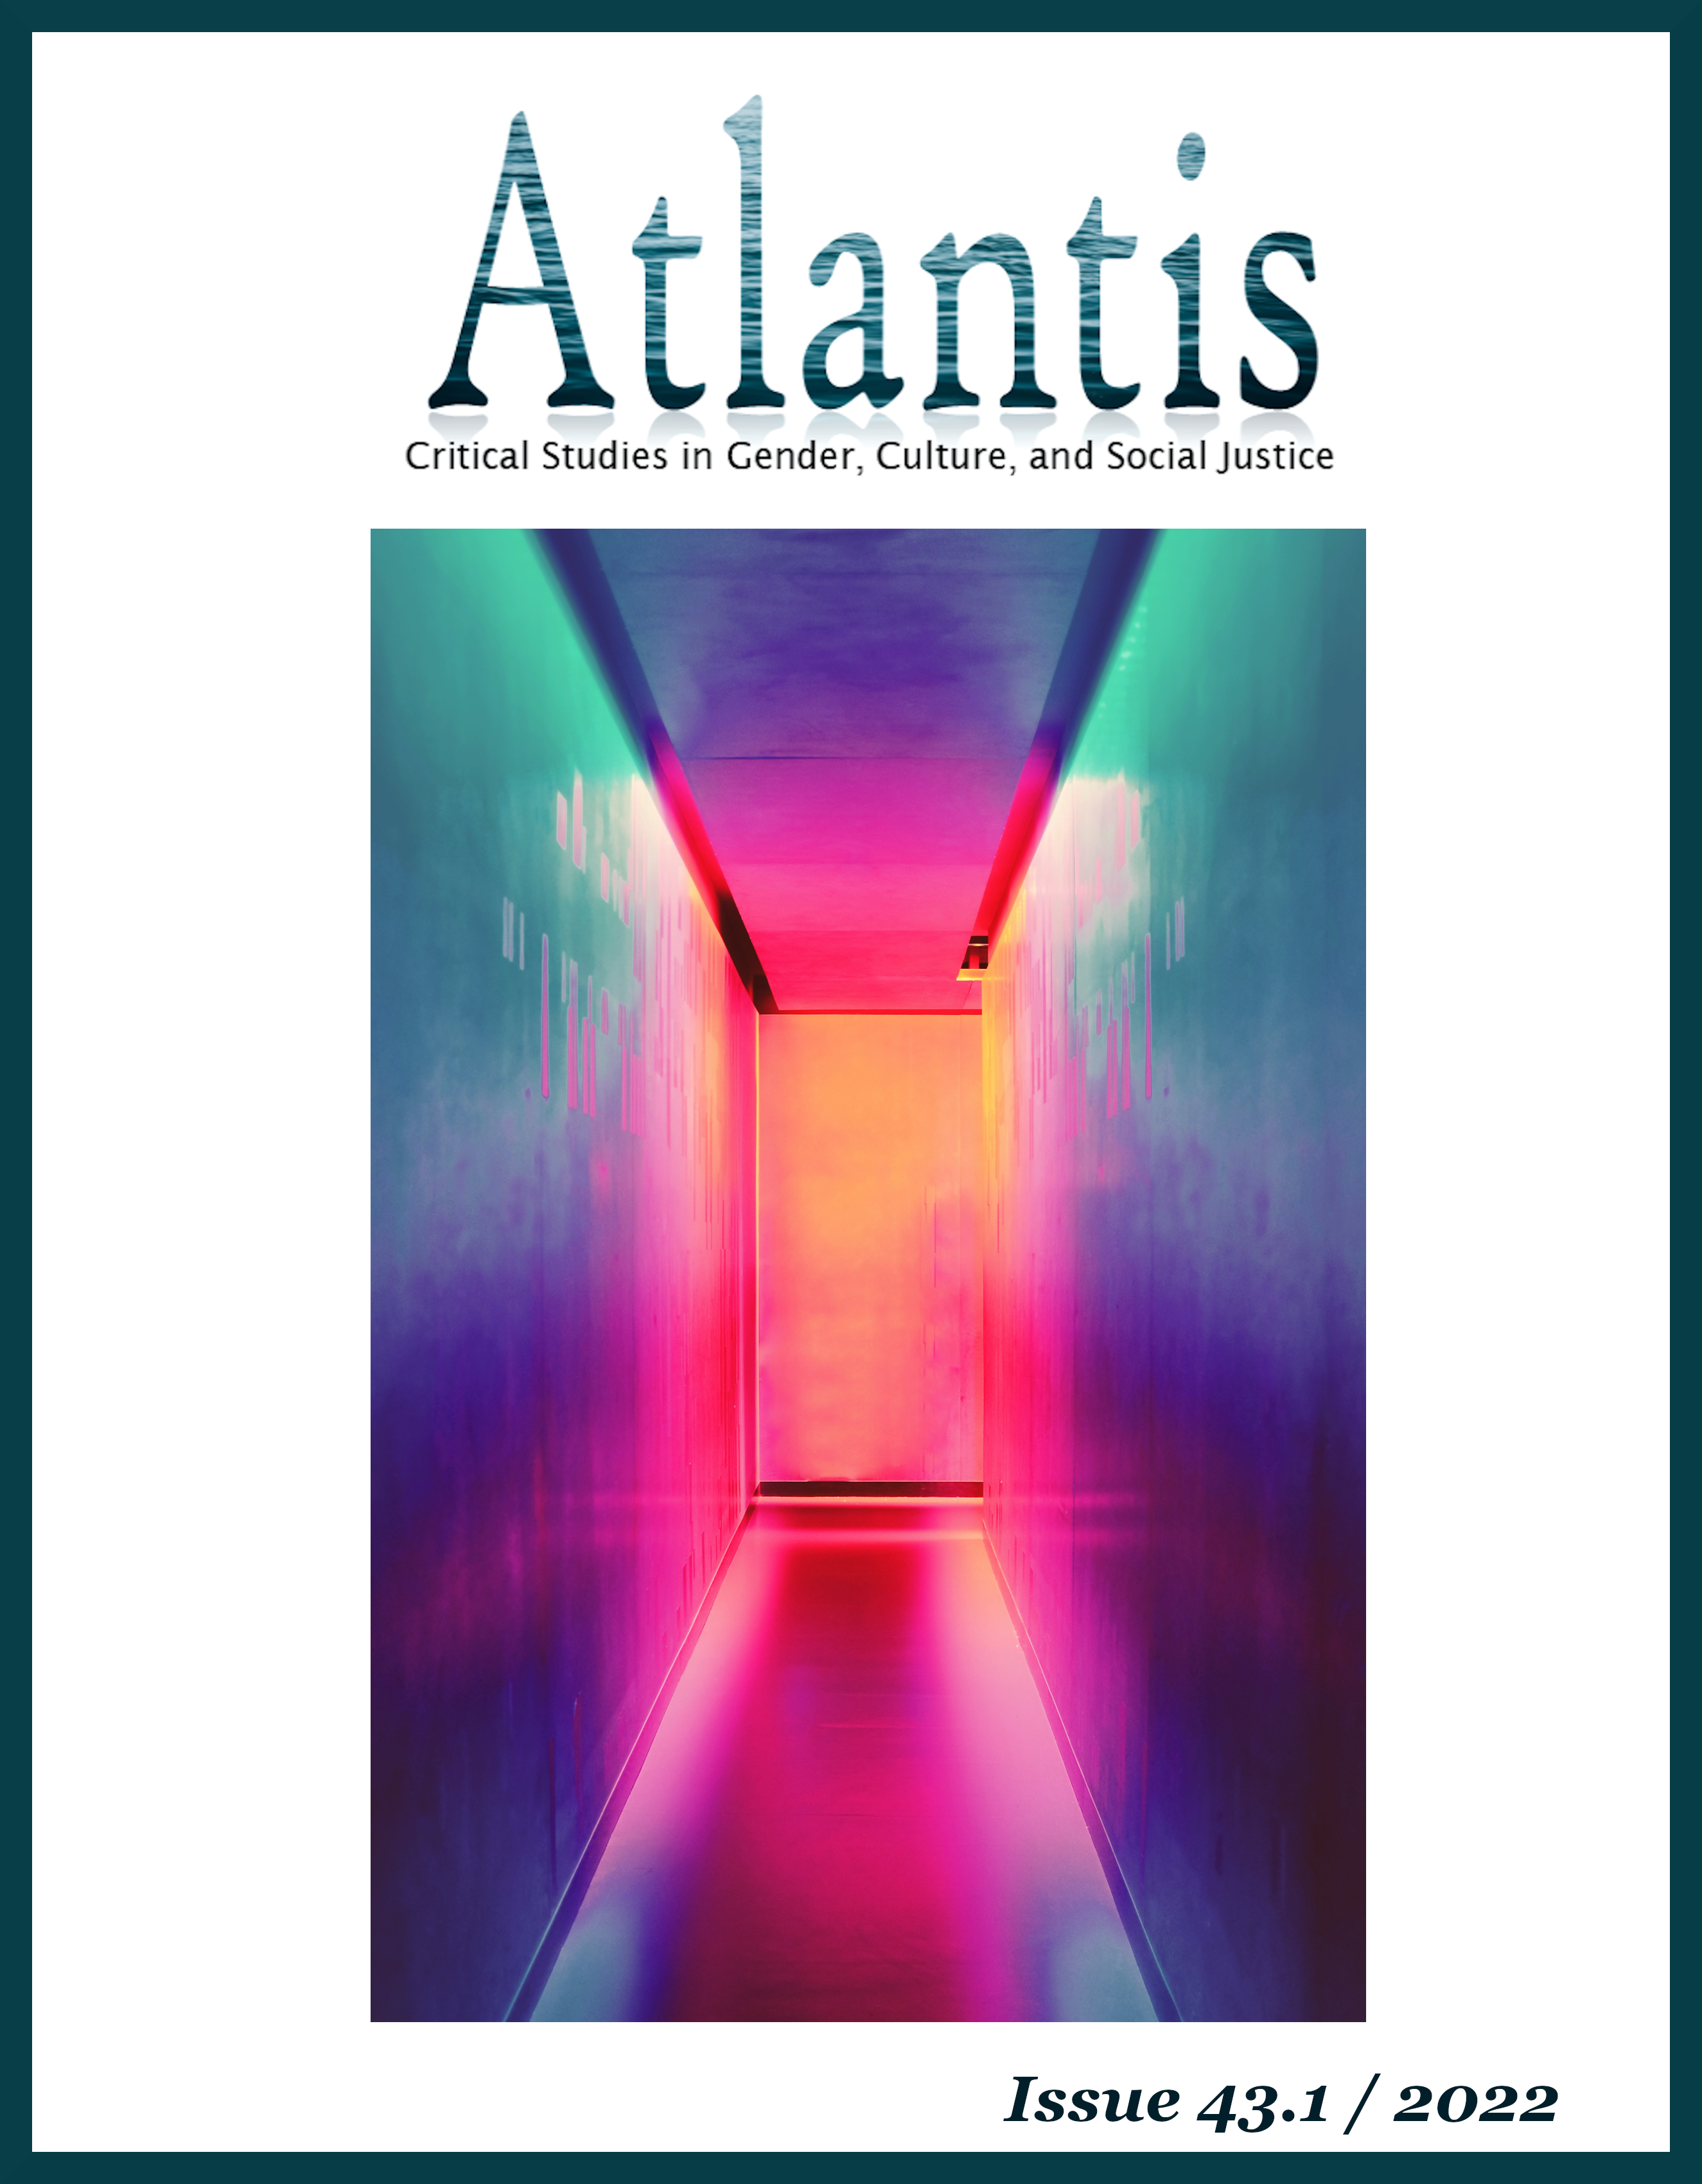 Atlantis logo and colorful image of hallway and door